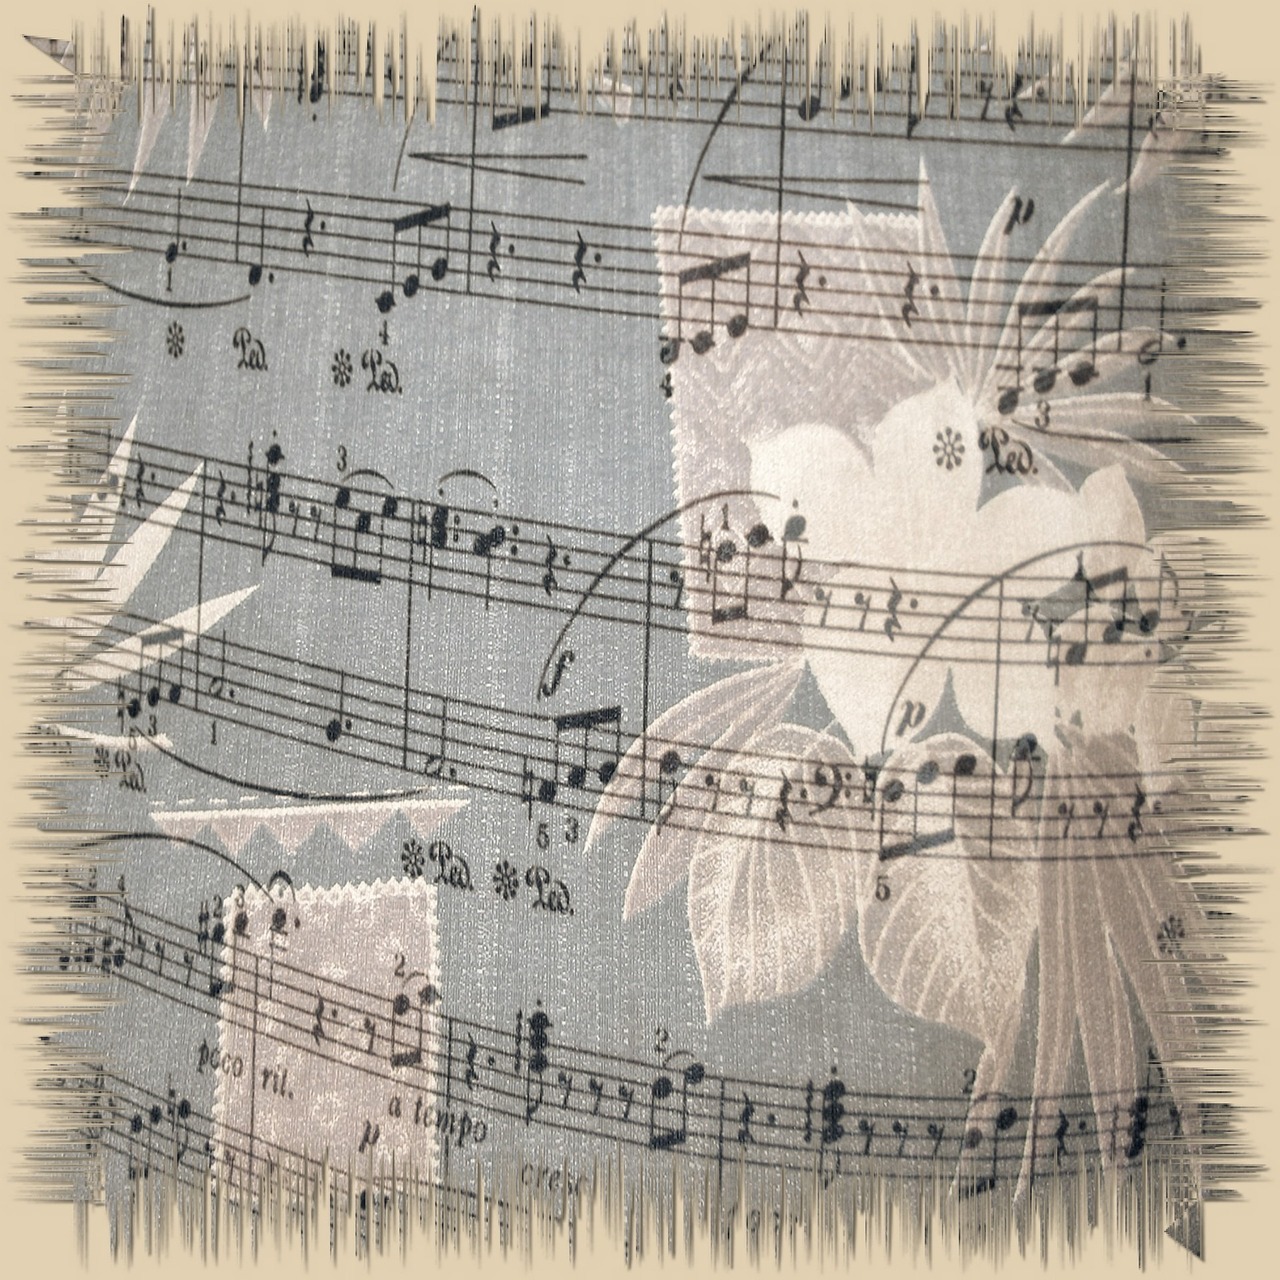 a close up of a sheet of music, inspired by Kawai Gyokudō, tumblr, retro style ”, tattered fabric, detailed ”